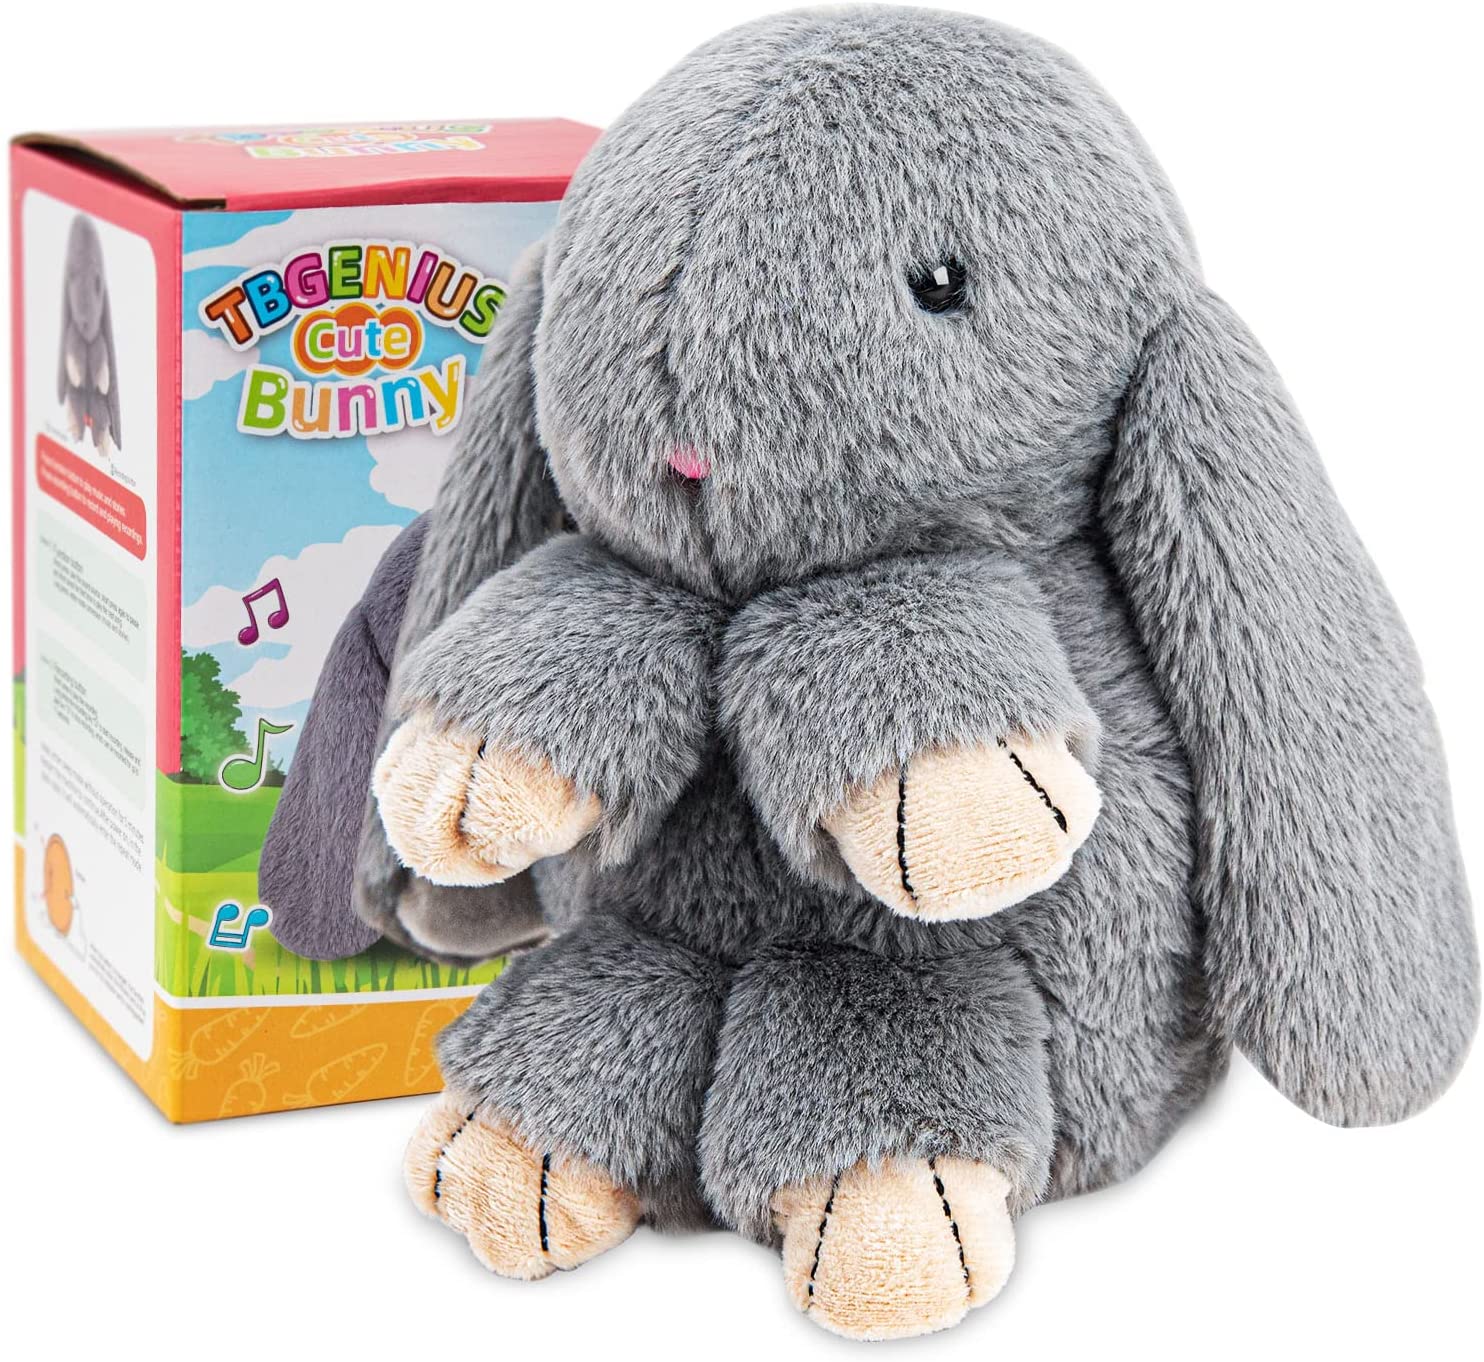 Talking Bunny Toys For Kids, Repeats What You Say, Interactive Stuffed Plush Animal Talking Toy, Singing, Dancing And Shaking For Girls Boys - TryKid